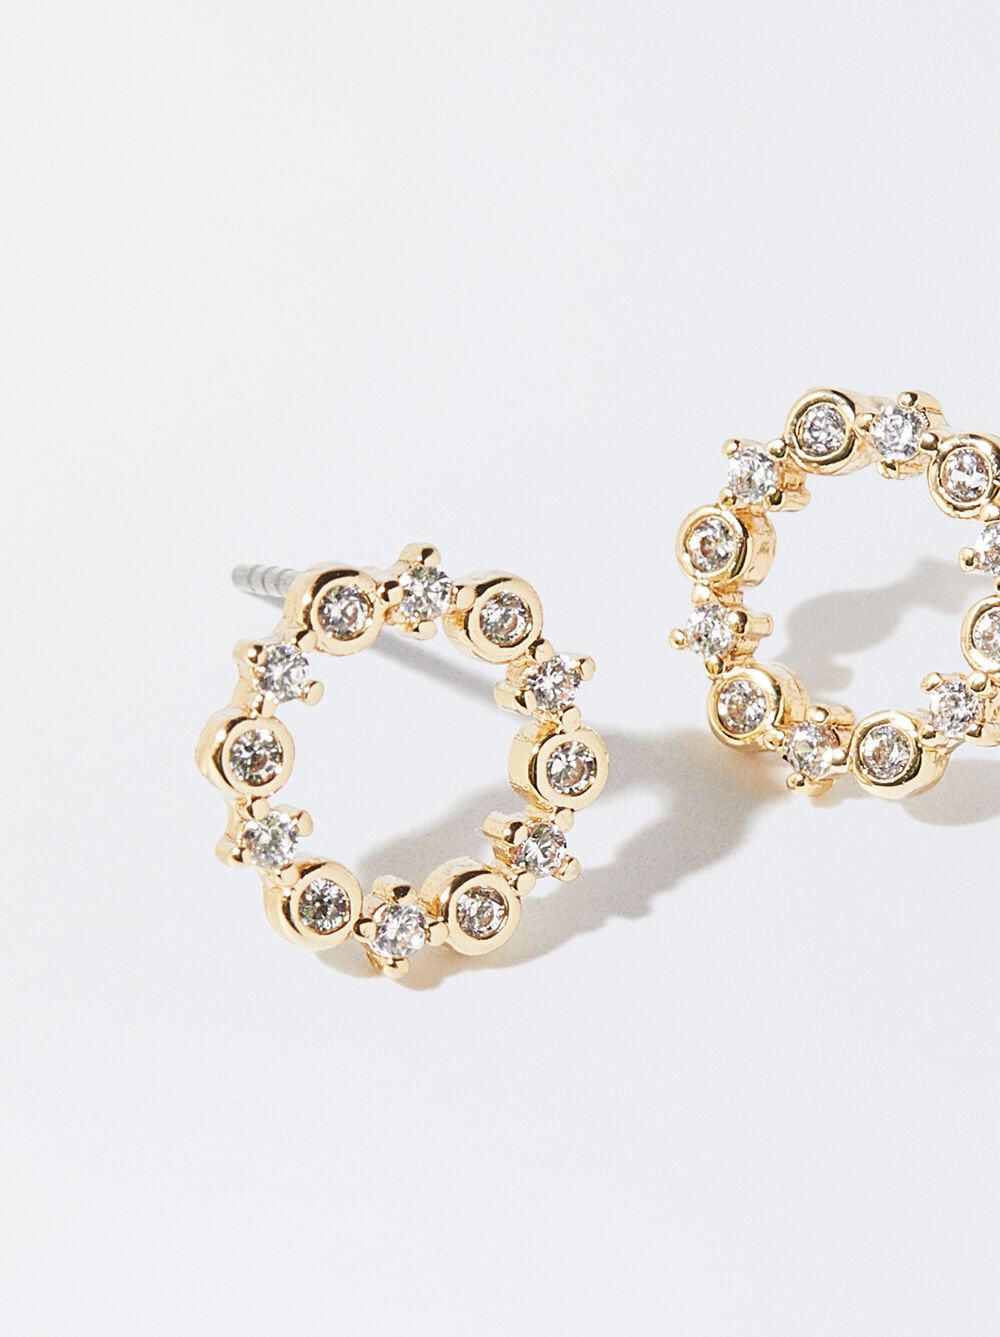 Gold-Toned Earrings With Cubic Zirconia